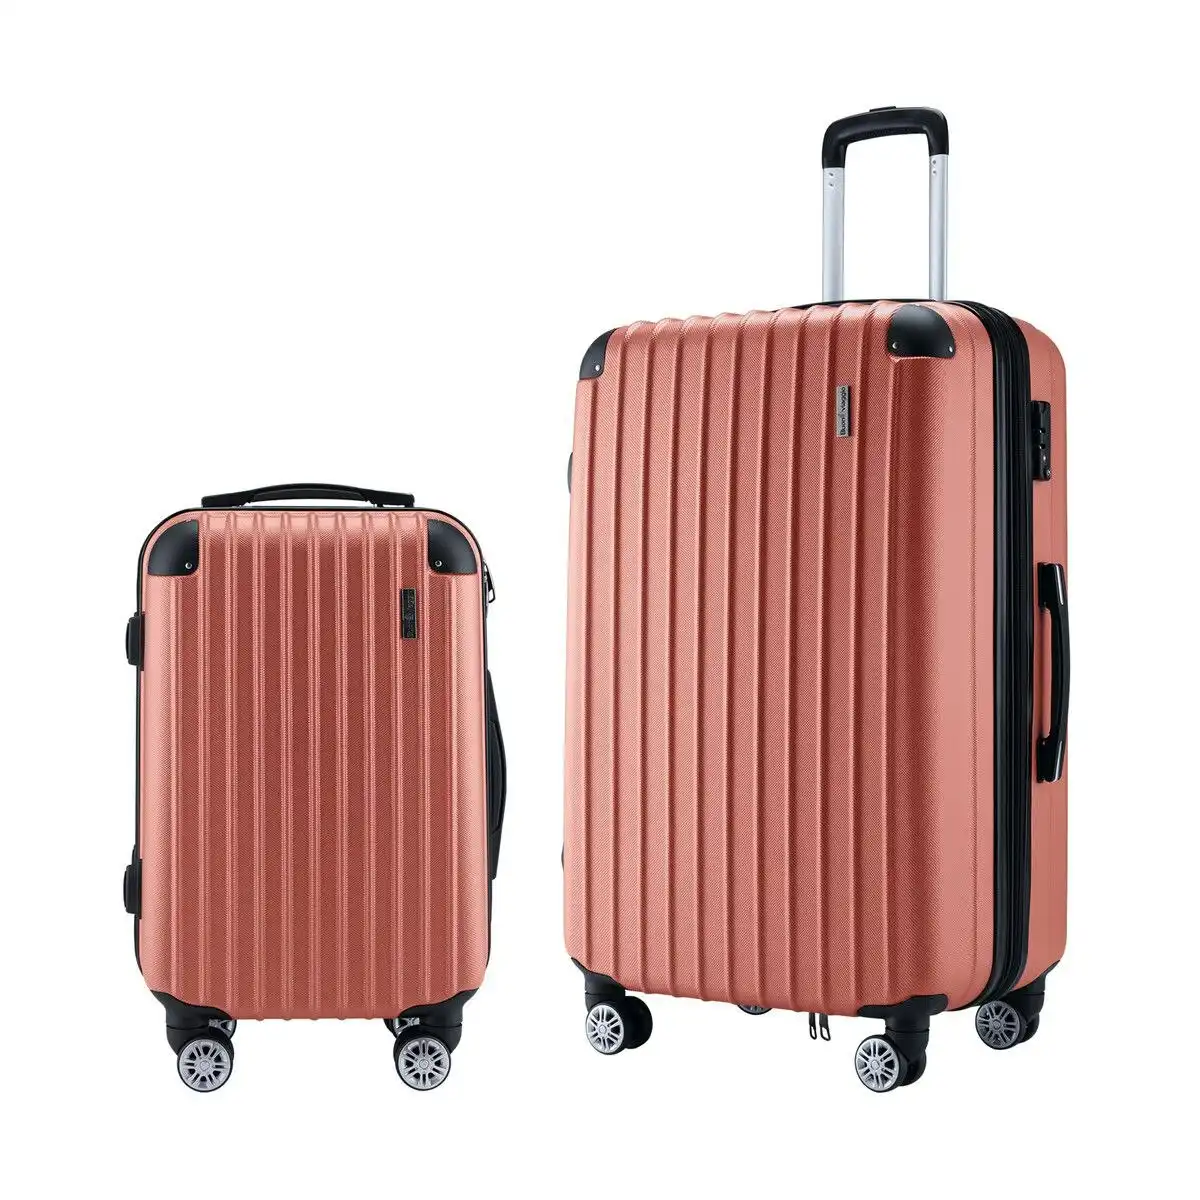 Buon Viaggio 2Pcs Luggage Set Carry On Suitcases Travel Case Cabin Hard Shell Travelling Bags Hand Baggage Lightweight Rose Gold